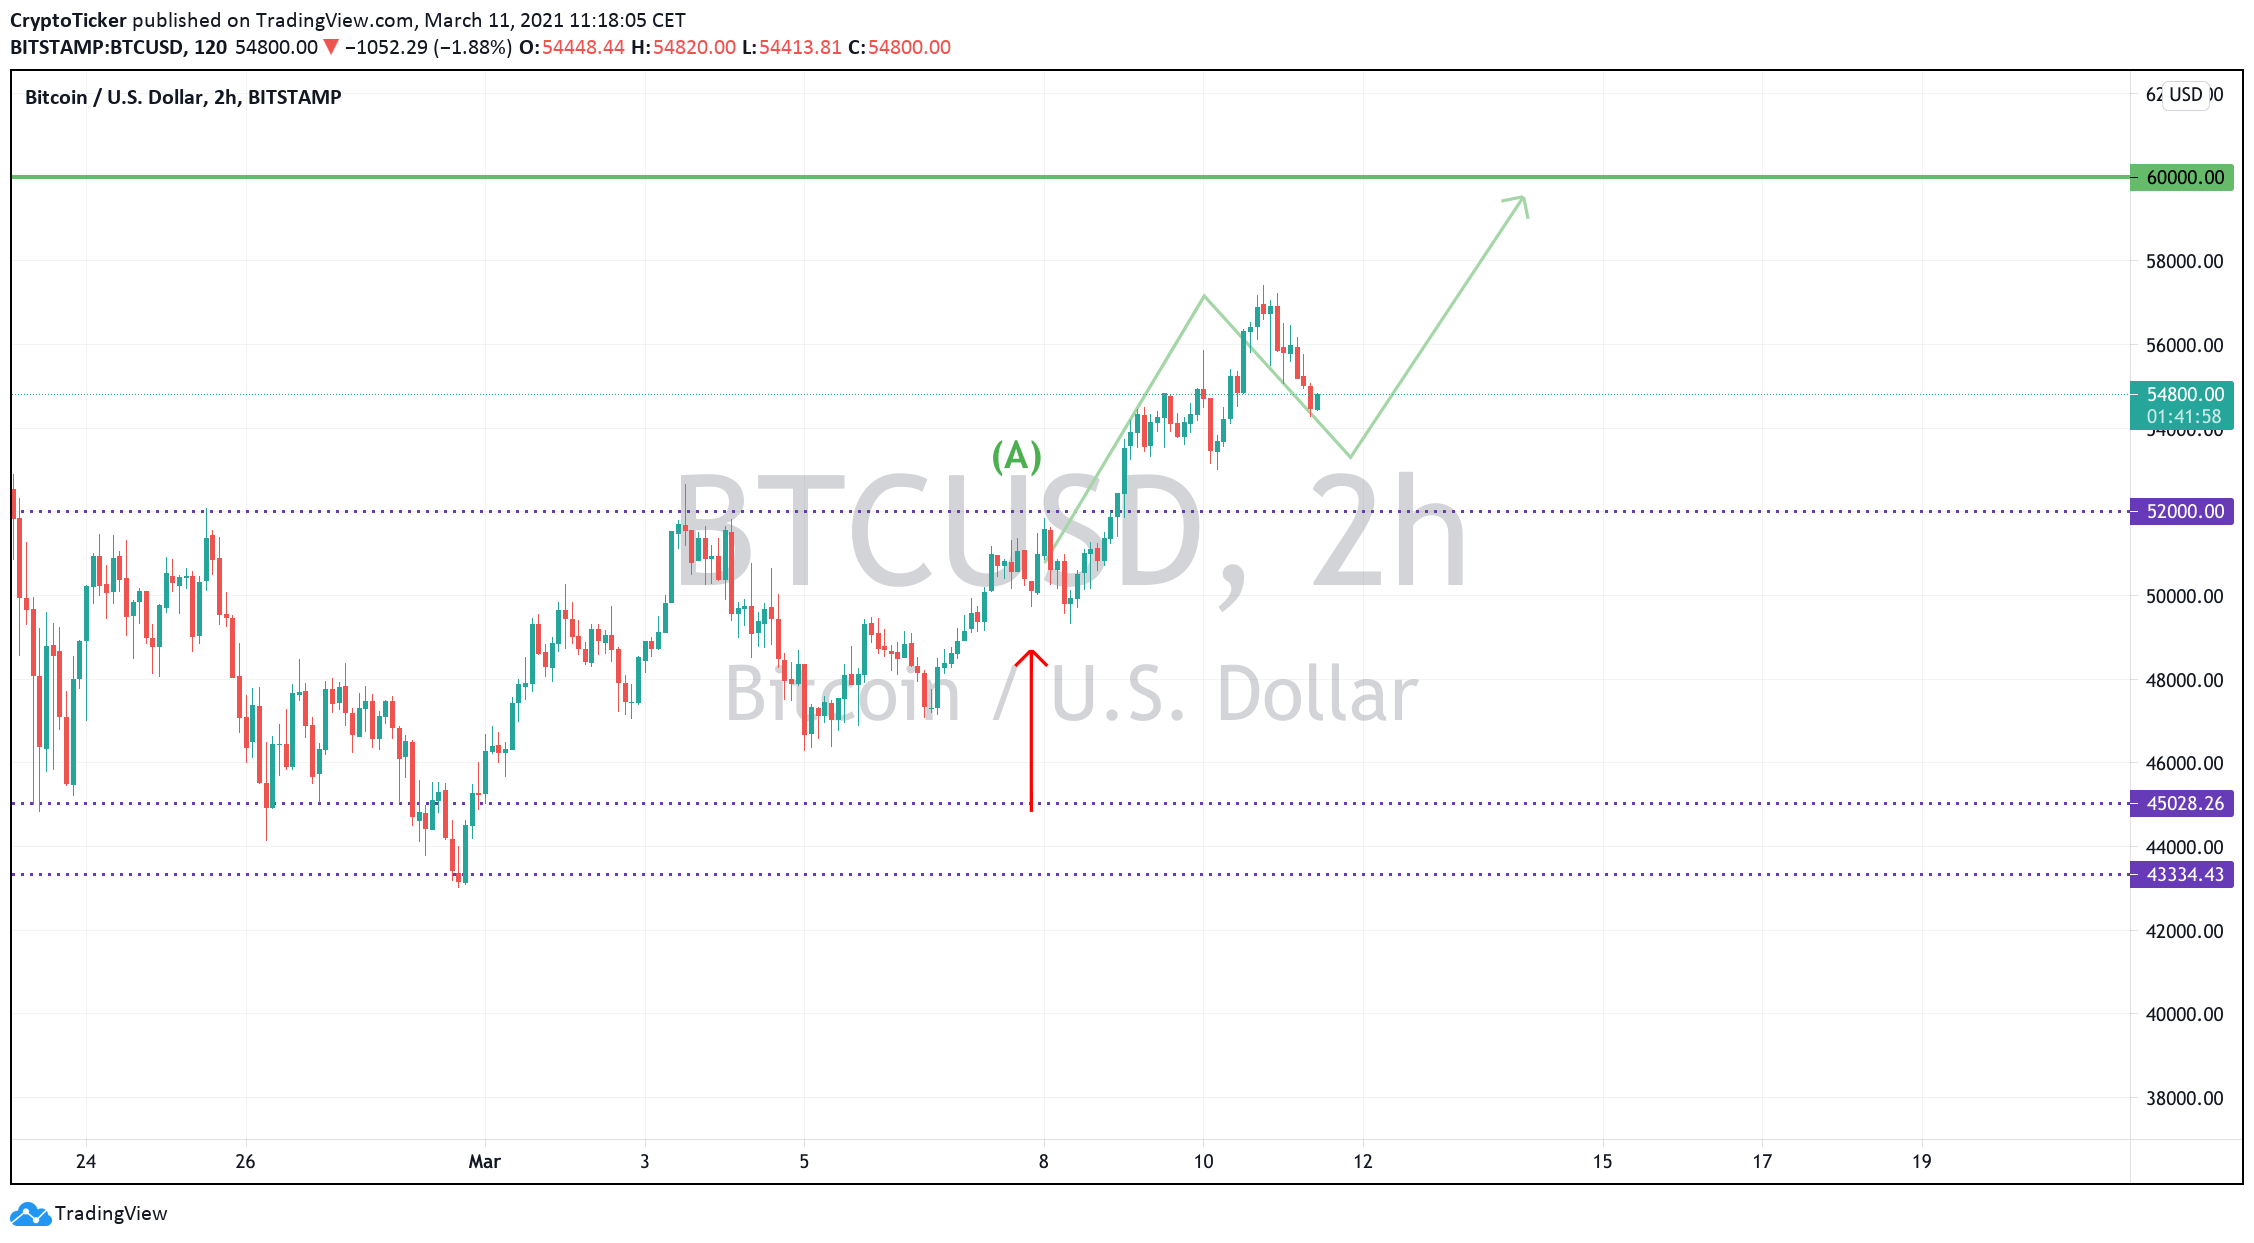 BTC/USD 2-hours chart showing Bitcoin's path as predicted in our previous article